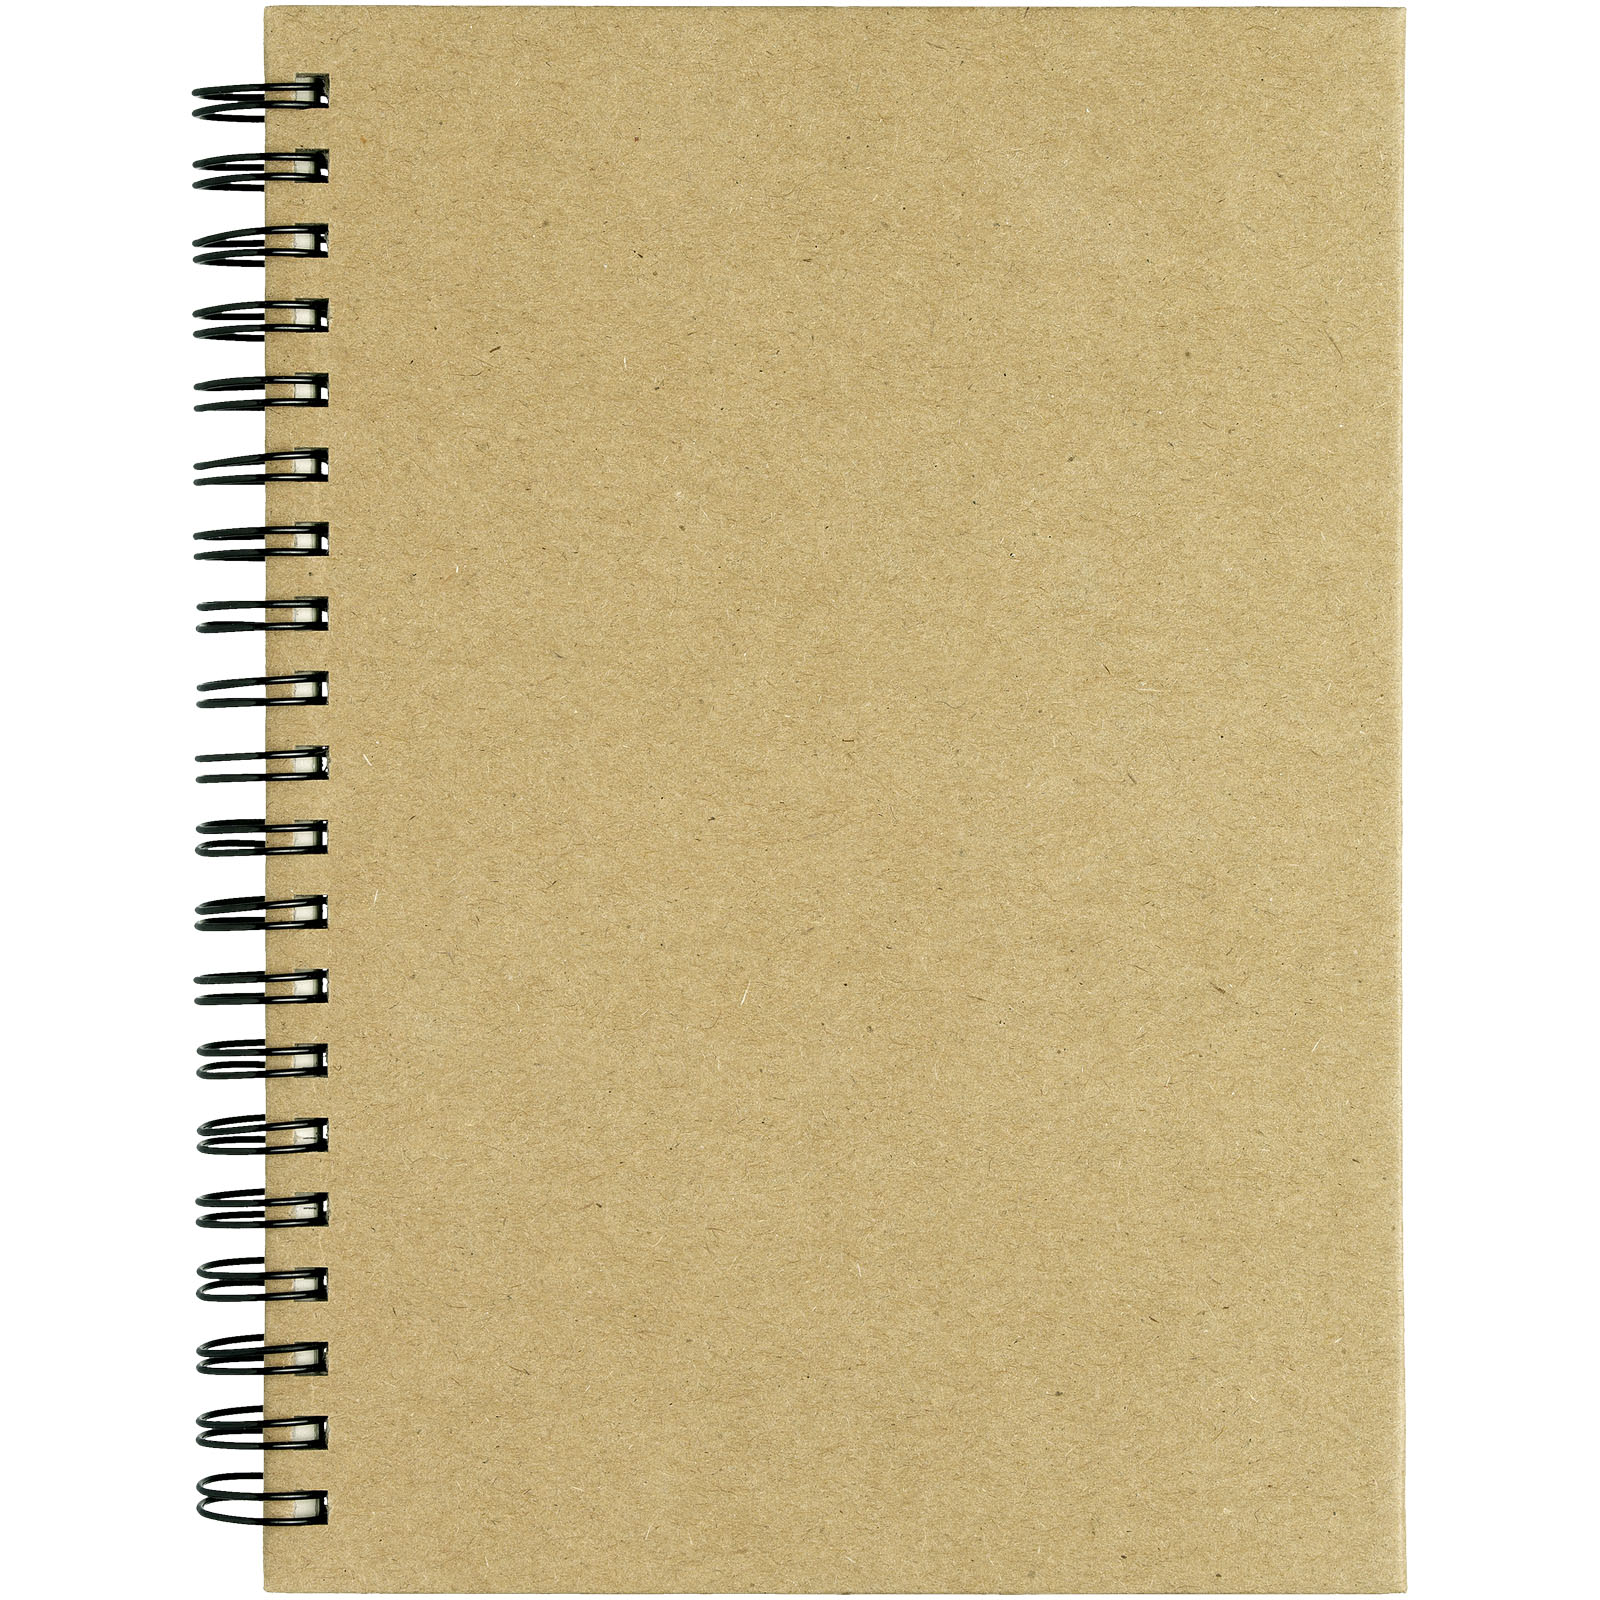 Advertising Hard cover notebooks - Mendel recycled notebook - 1